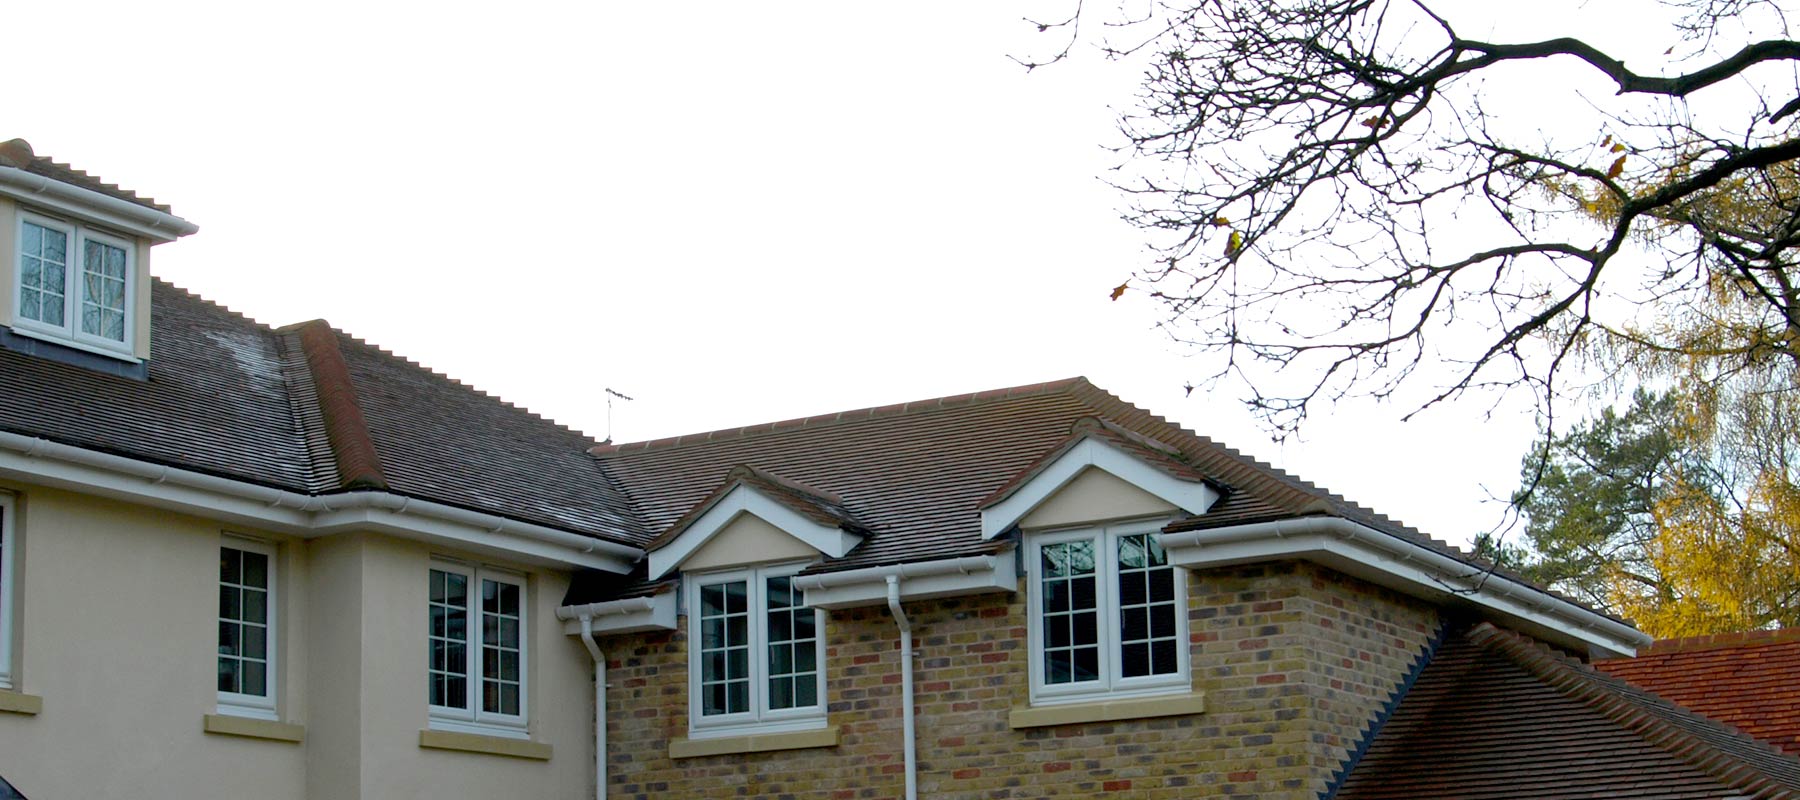 Paul Nunn Roofing Ltd-Roofing Contractor-Suffolk-Cambridge-Newmarket-National Federation of Roofing Contractors